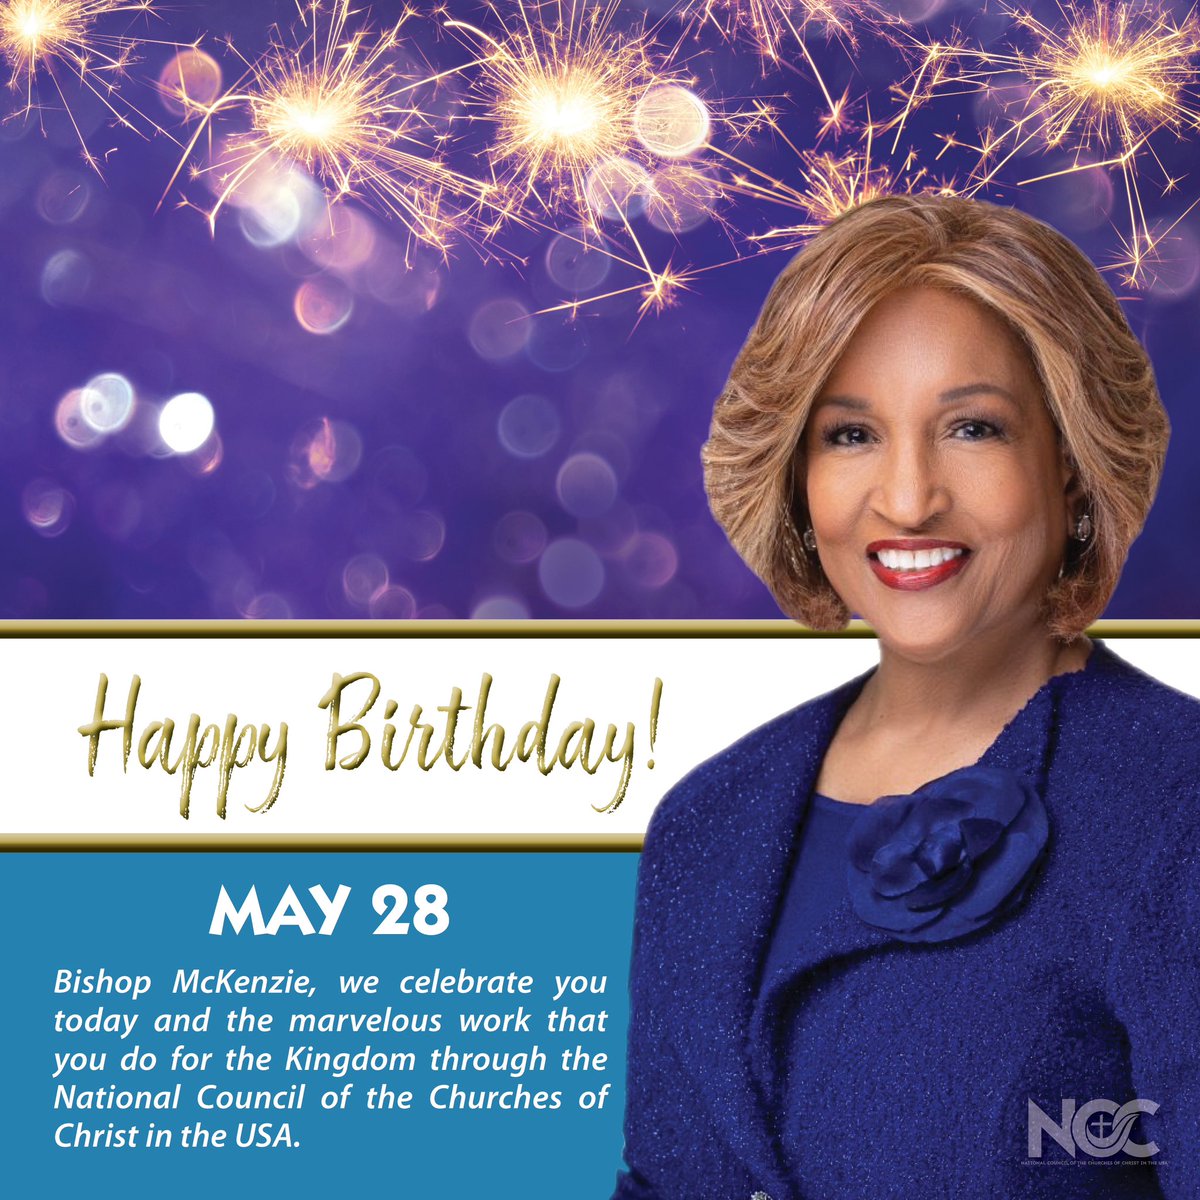 Happiest birthday to Bishop Vashti McKenzie, President and General Secretary of the National Council of the Churches of Christ in the USA (NCC)! We celebrate you today and the marvelous work you do for the Kingdom through the NCC.